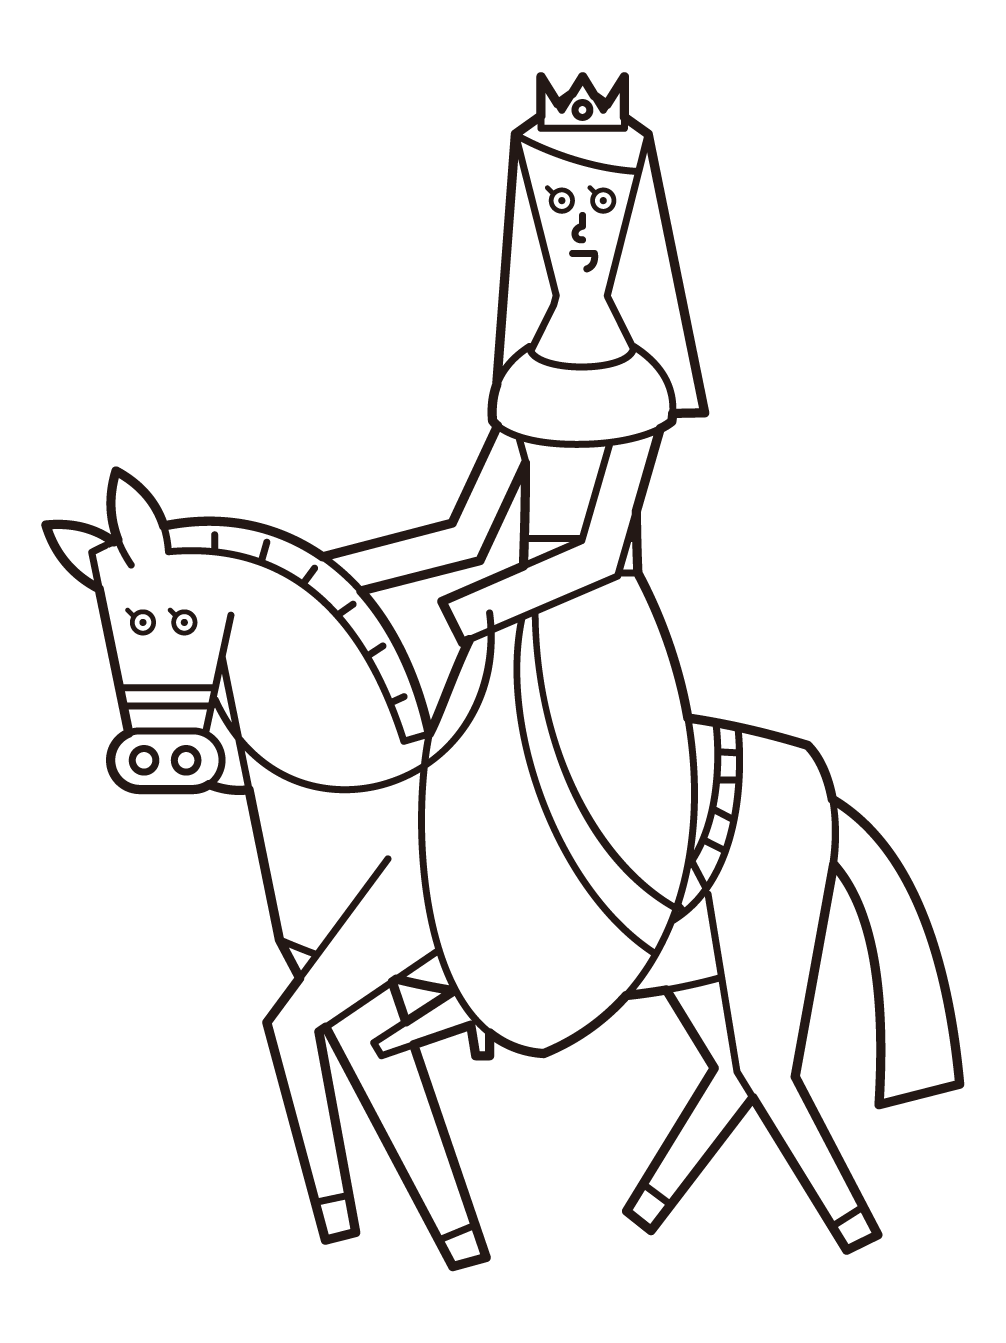 Illustration of a princess (woman) on a white horse